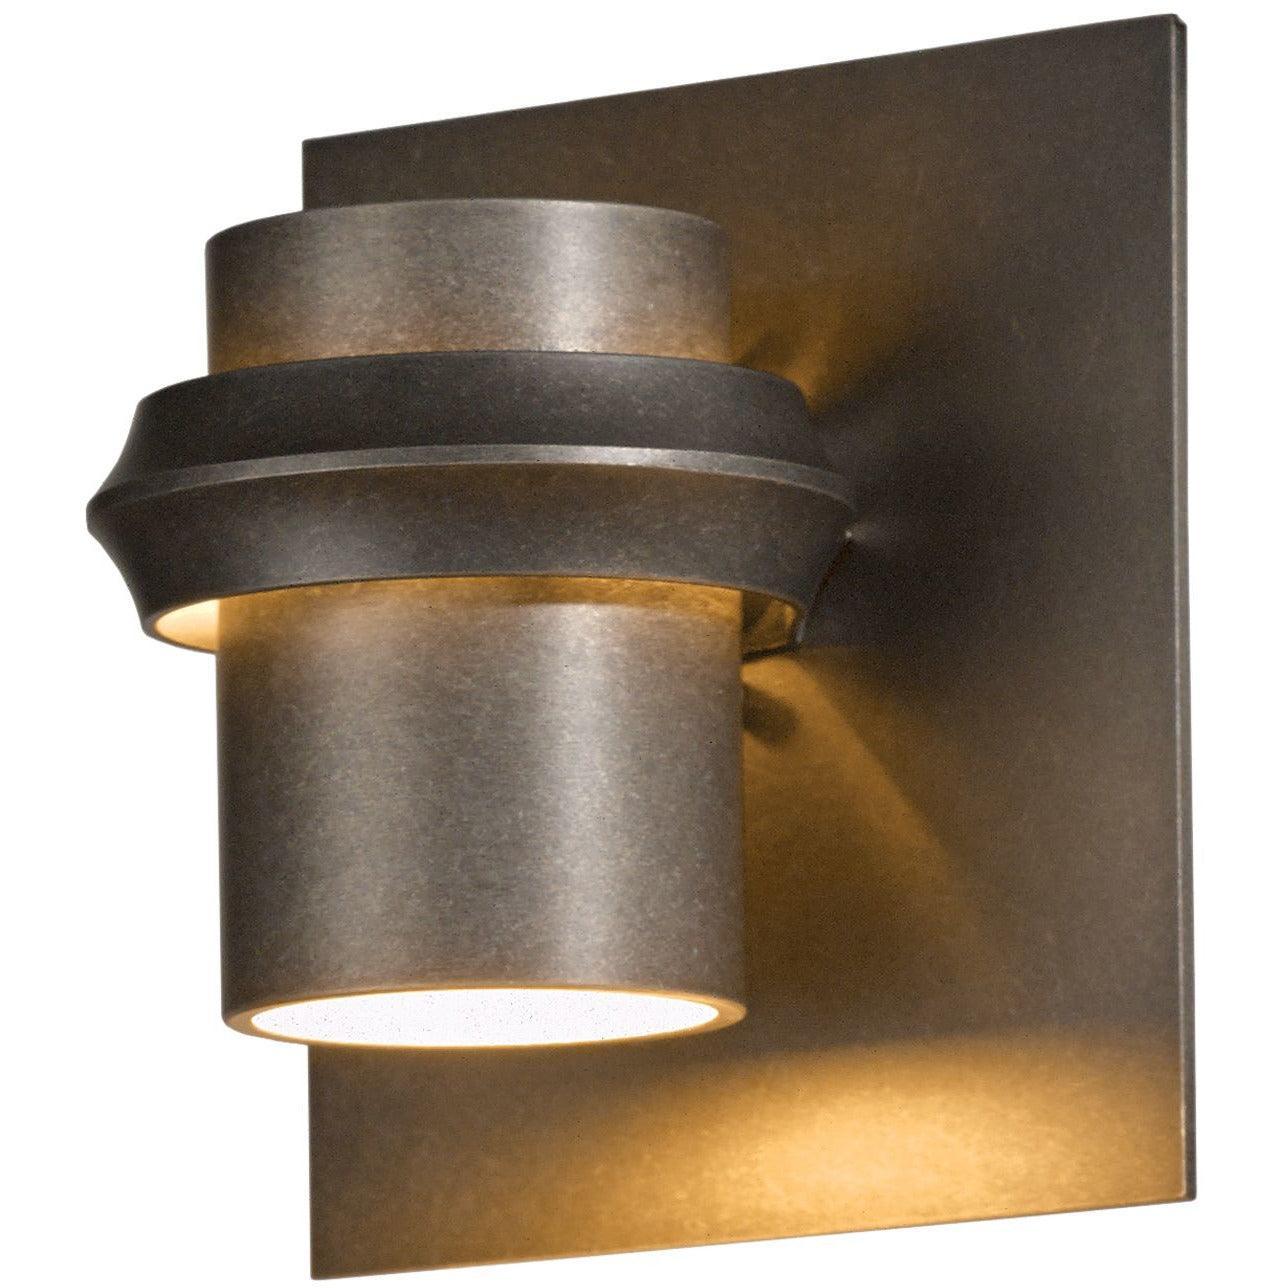 Hubbardton Forge - Twilight 7-Inch One Light Outdoor Wall Sconce - 304901-SKT-77 | Montreal Lighting & Hardware